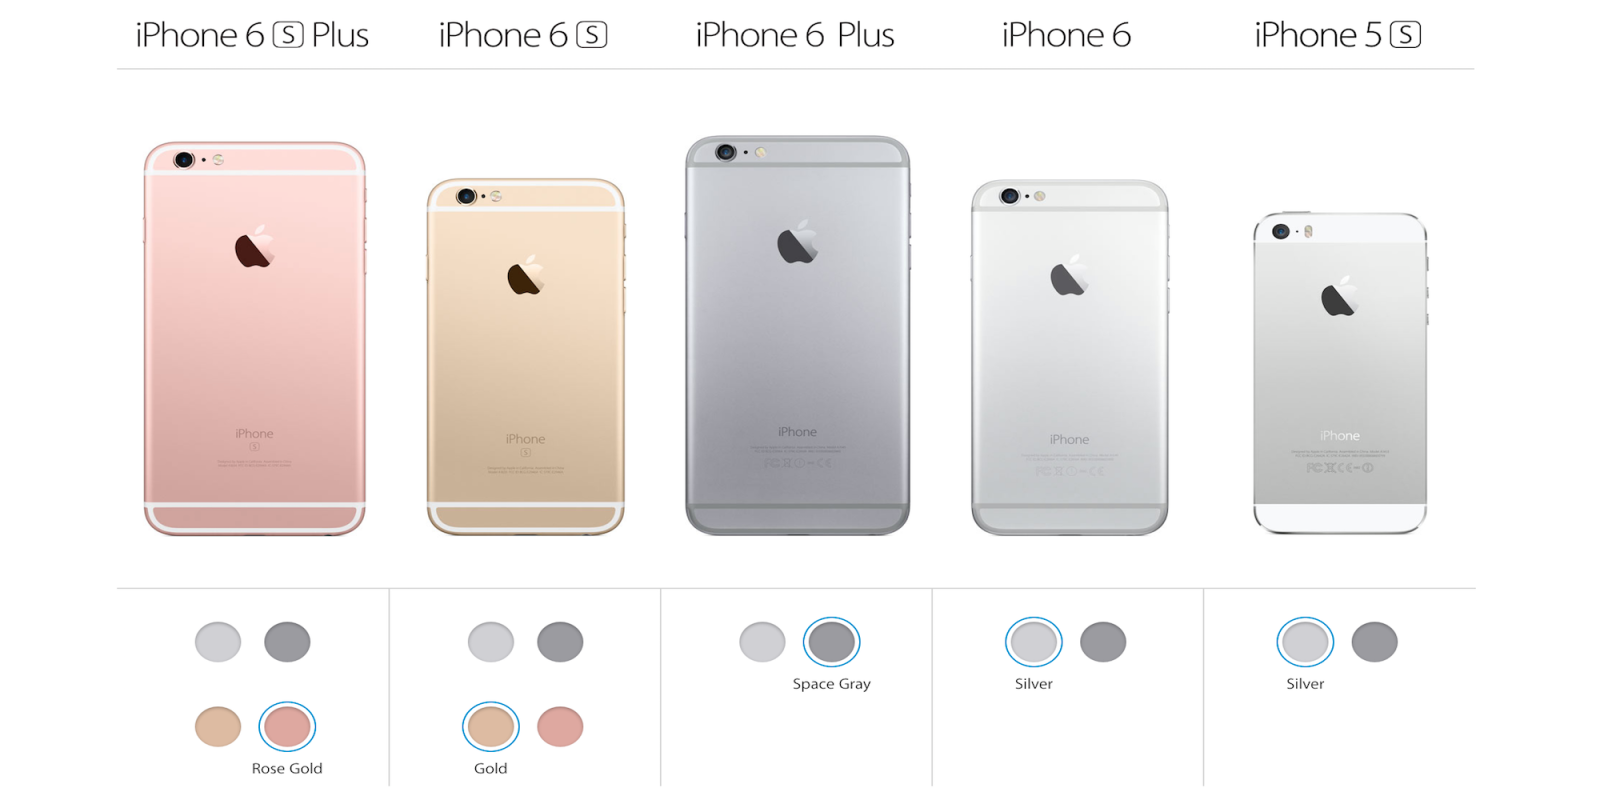 With Iphone 6s Launch Apple No Longer Offers Gold Color Option For Iphone 6 6 Plus 5s 9to5mac